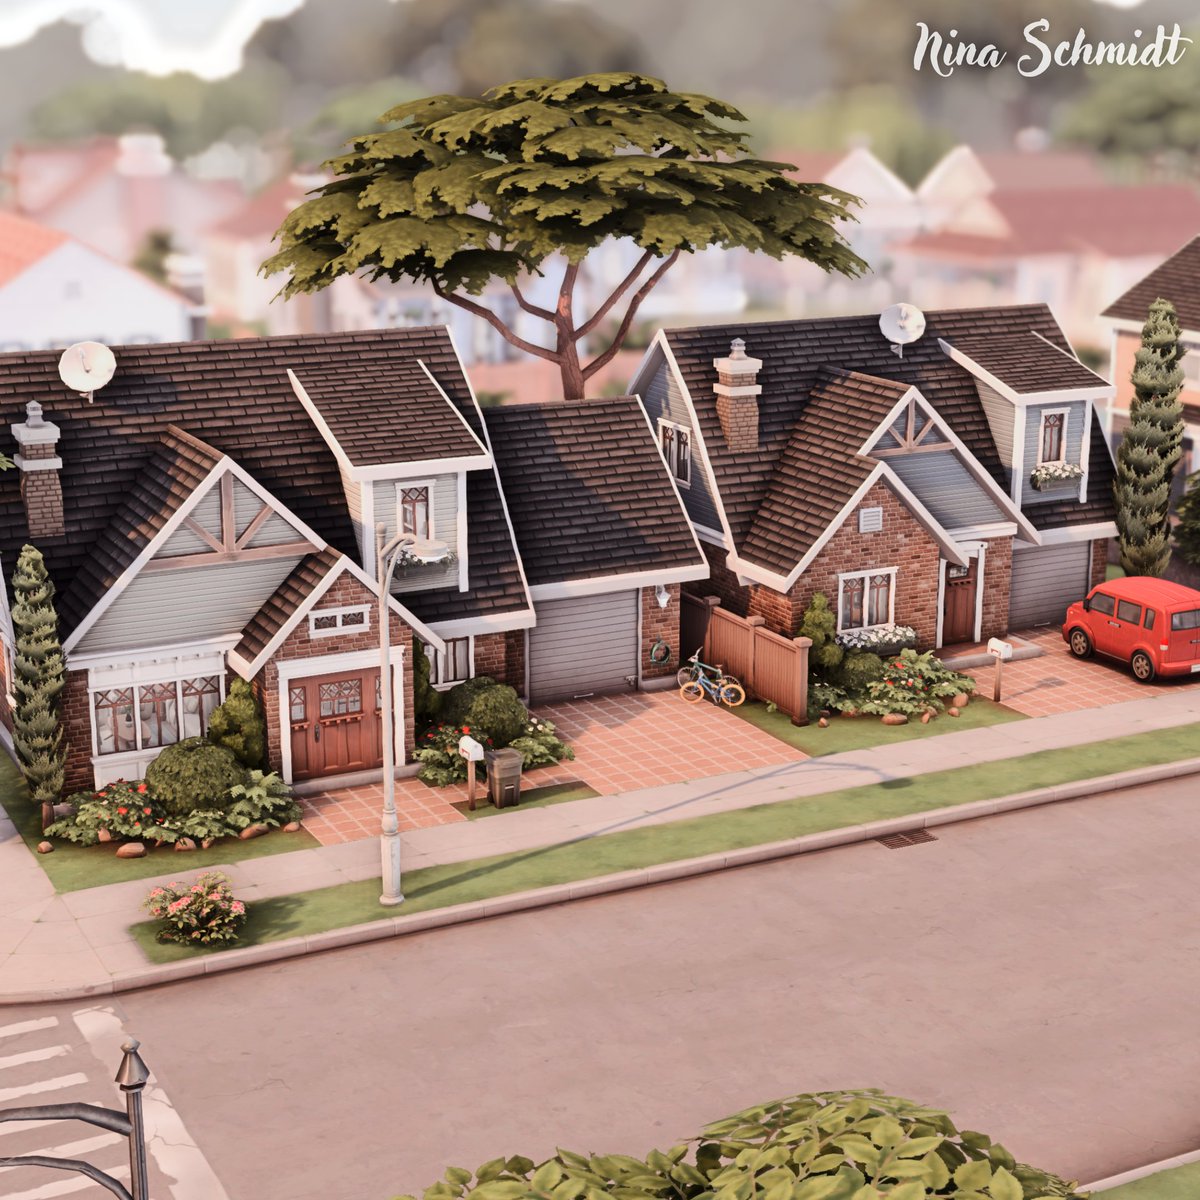 TWO SMALL FAMILY HOUSES ON ONE LOT 🏡 youtu.be/pRu1Oyz_TAU

#TheSims #TheSims4 #ShowUsYourBuilds